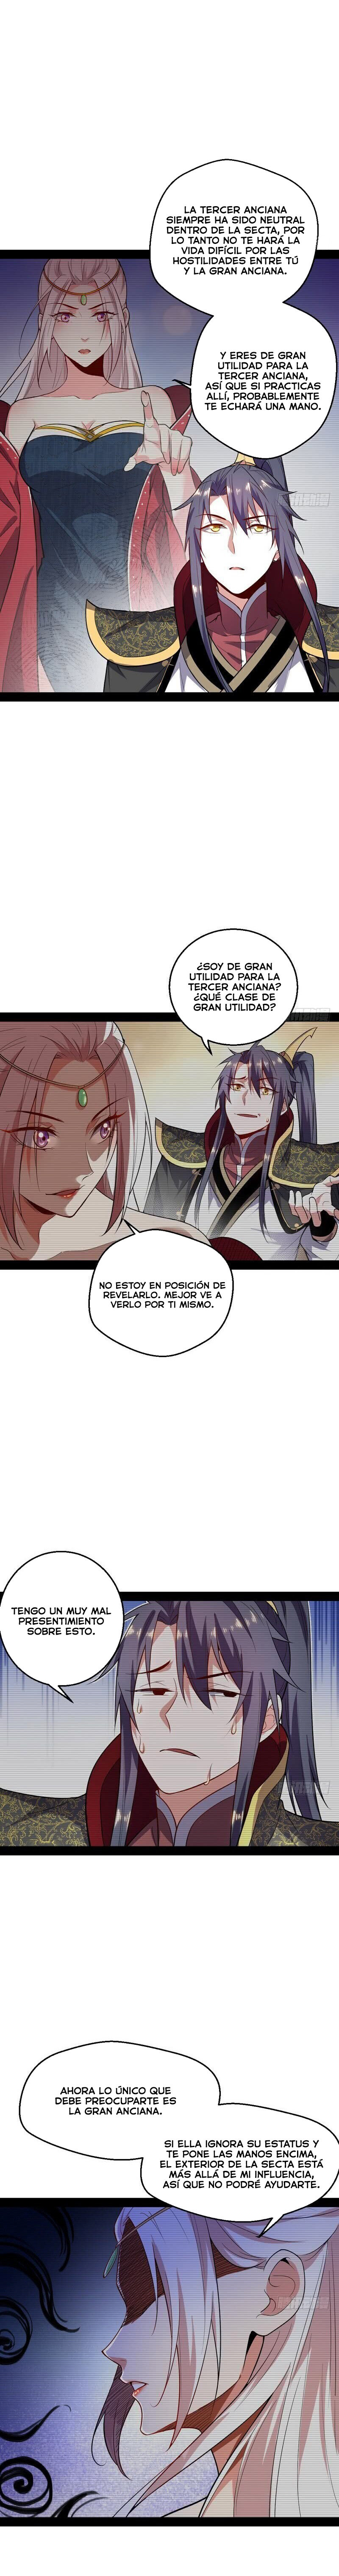 Manga Soy un dios maligno Chapter 25 image number 2